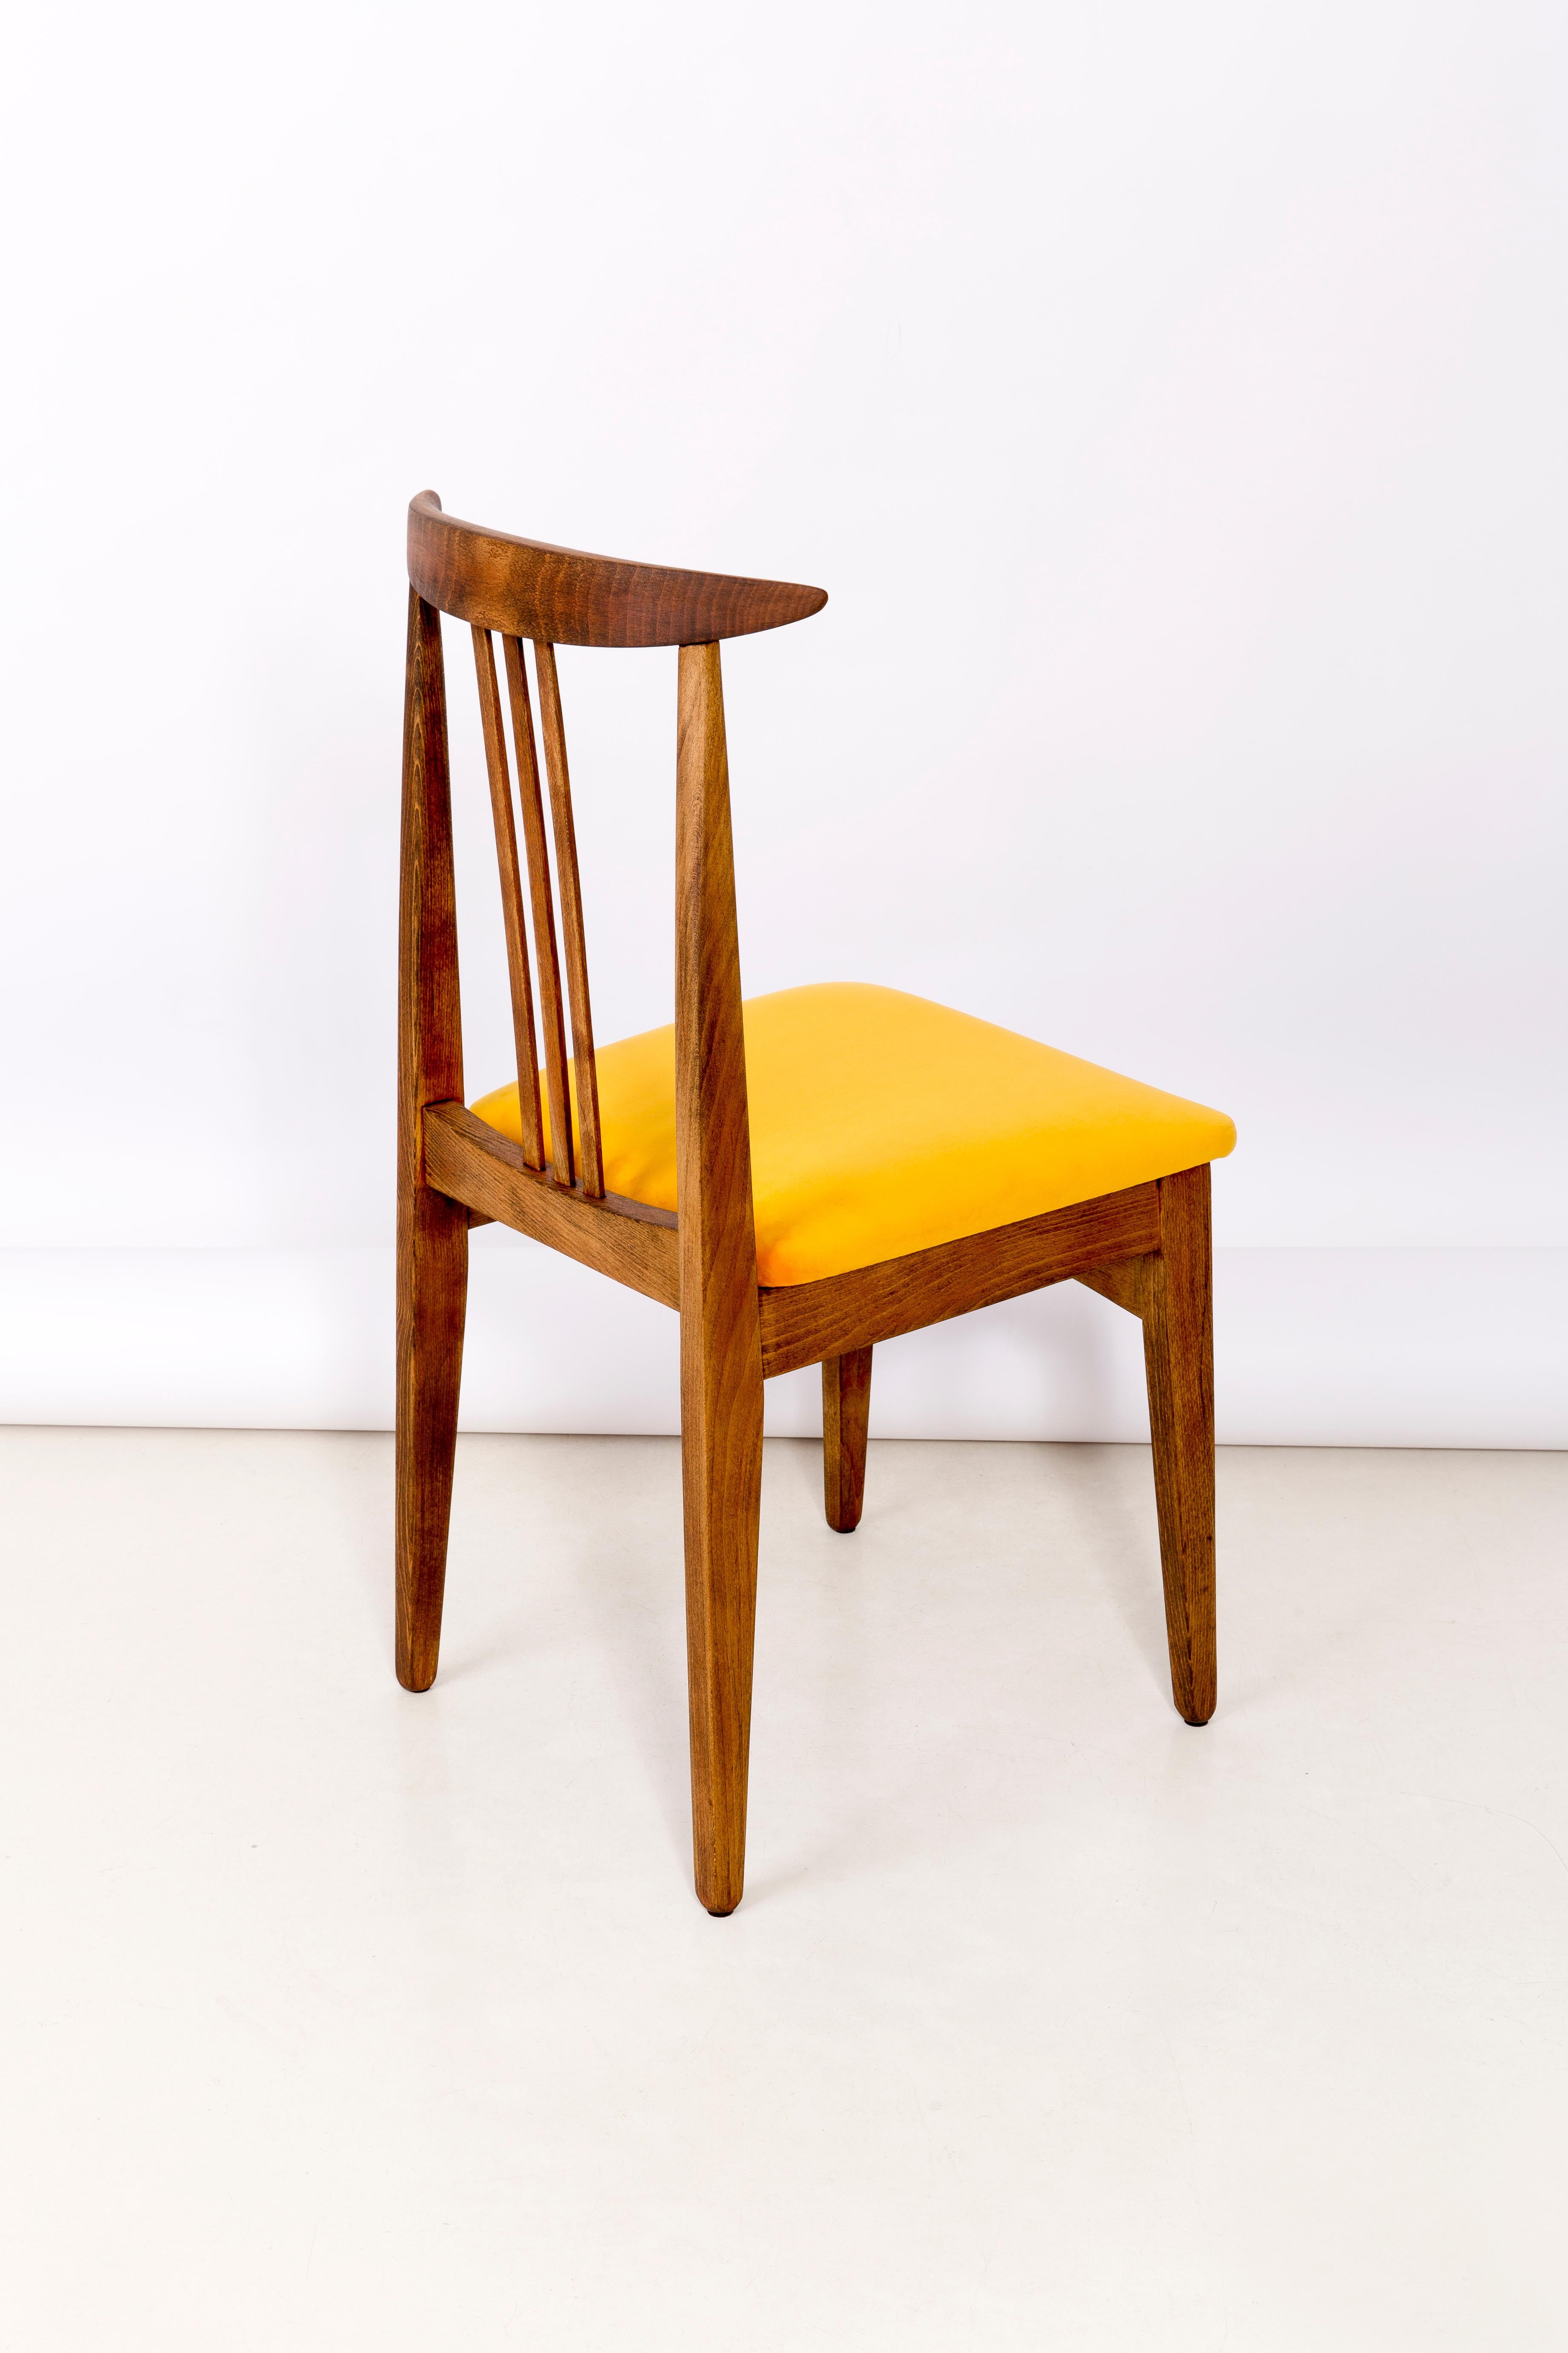 Set of Twelve Yellow Chairs, by Zielinski, Europe, 1960s For Sale 3